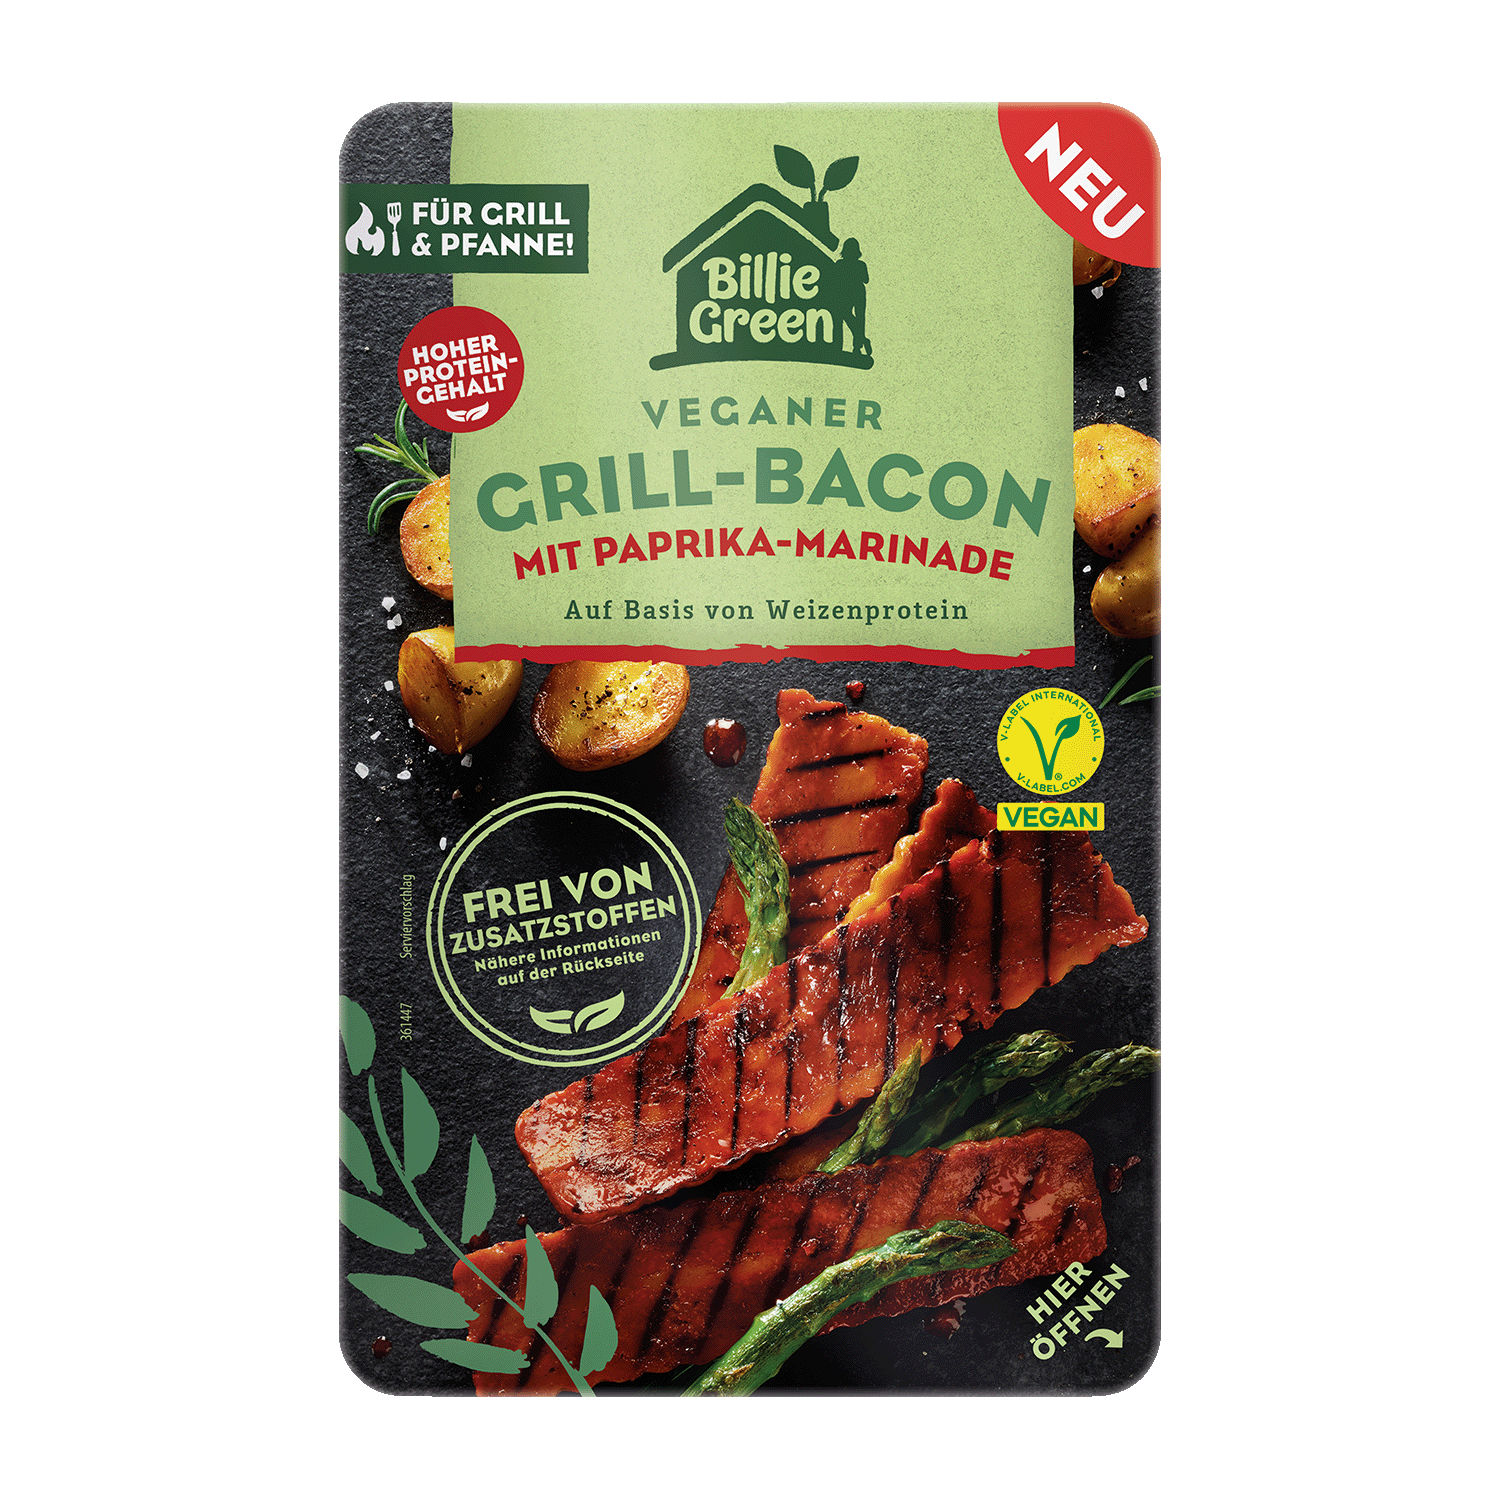 Vegan Grilled Bacon with Paprika Marinade, 180g